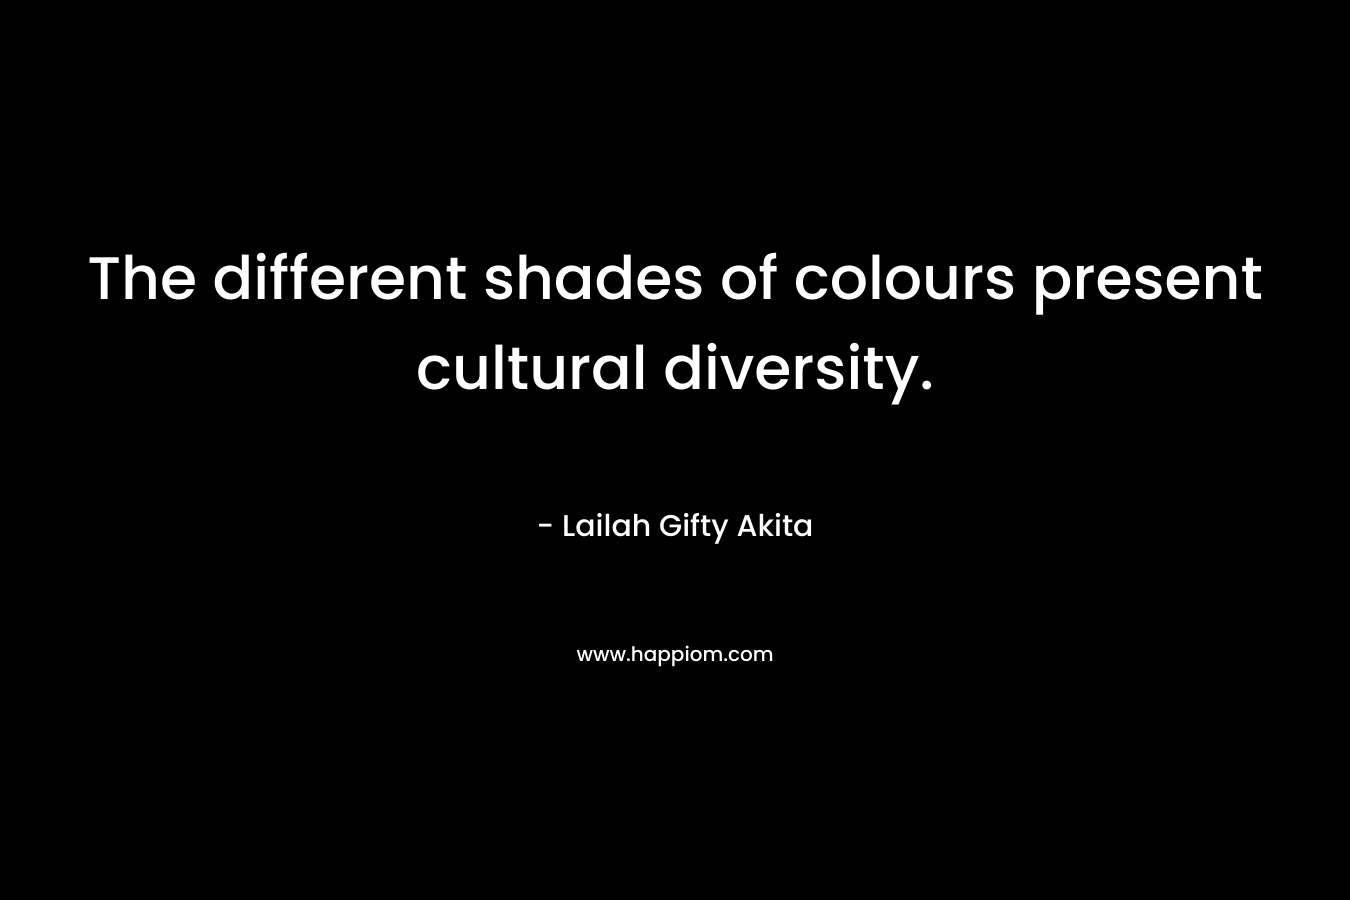 The different shades of colours present cultural diversity. – Lailah Gifty Akita